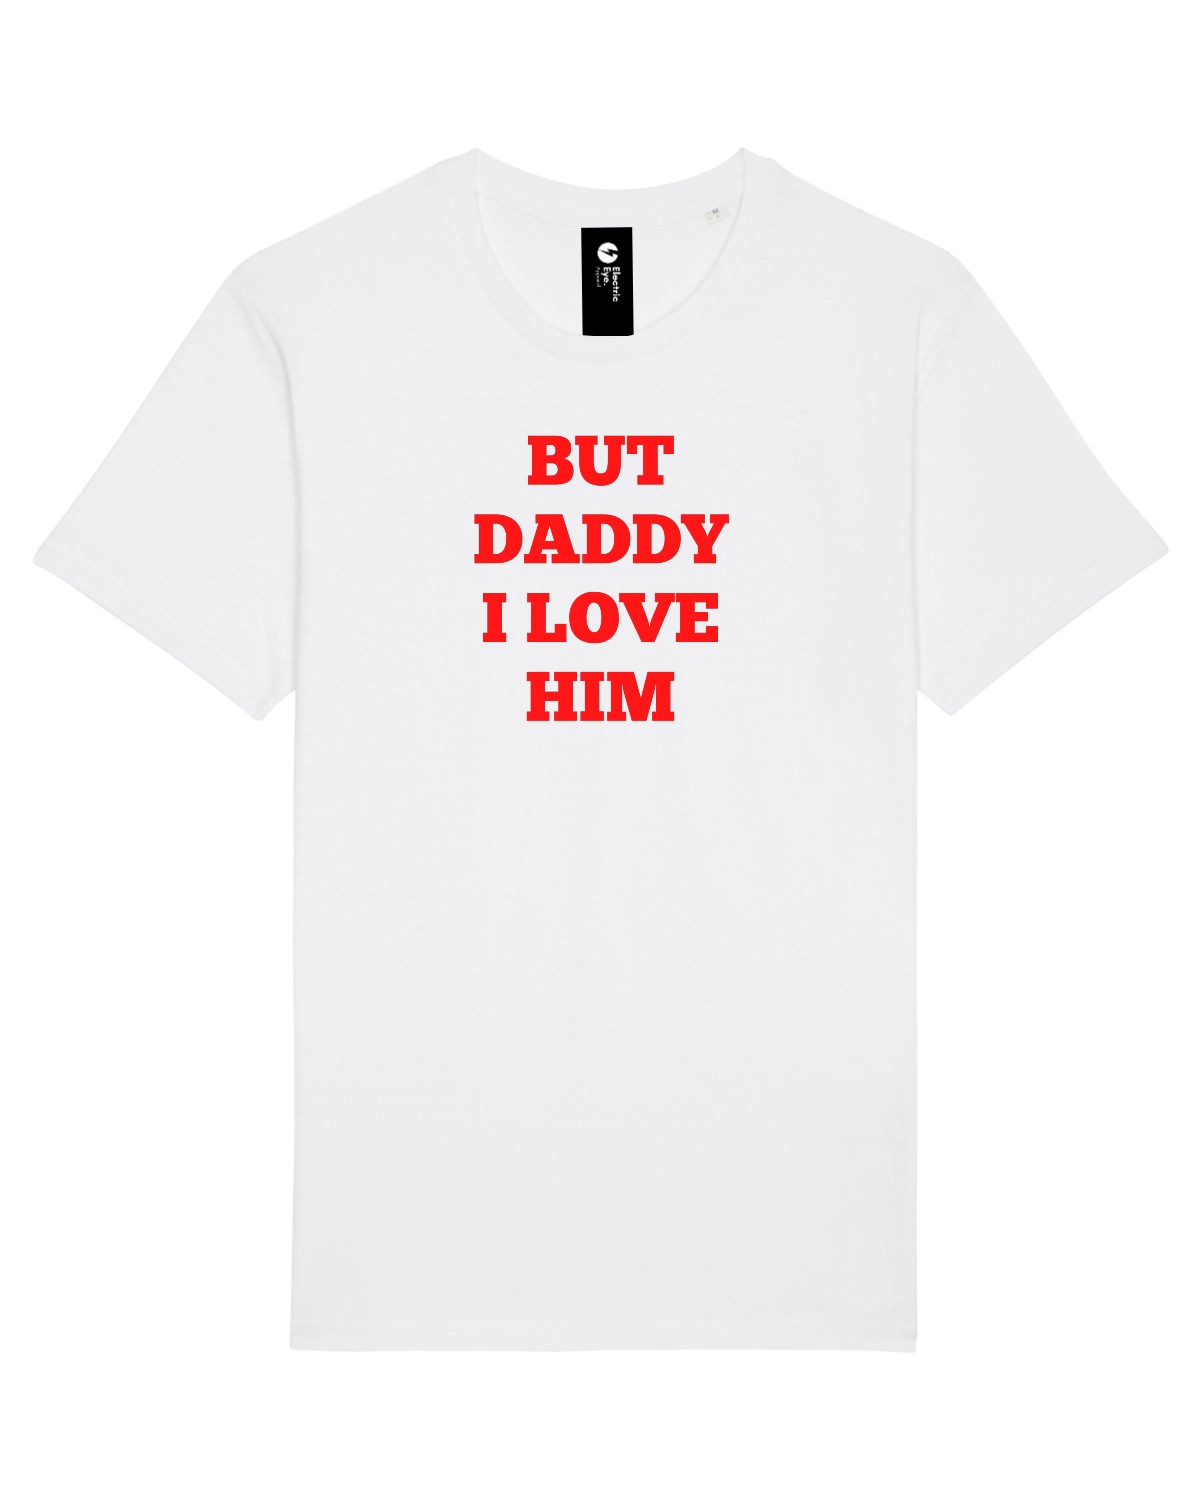 SAMPLE SALE 'BUT DADDY I LOVE HIM' (Harry Styles inspired) EMBROIDERED UNISEX MEDIUM FIT ORGANIC COTTON T-SHIRT (SIZE SMALL & XXL)